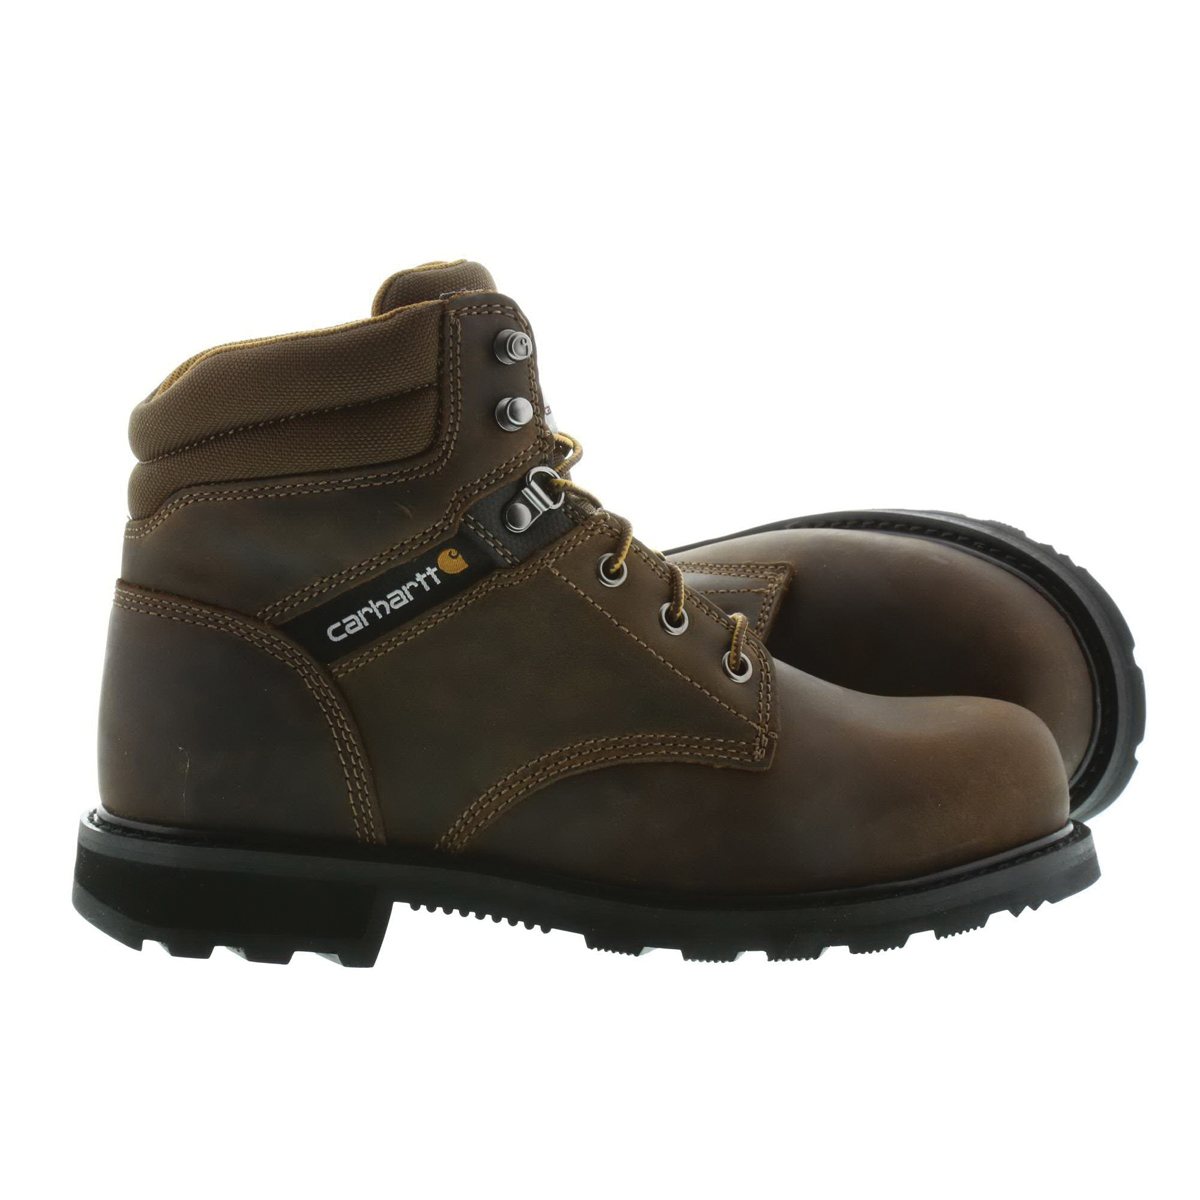 Carhartt CMW6174-9M Work Boots, 9, M W, Dark Brown Oil Tanned, Leather Upper, Lace-Up Closure - 3